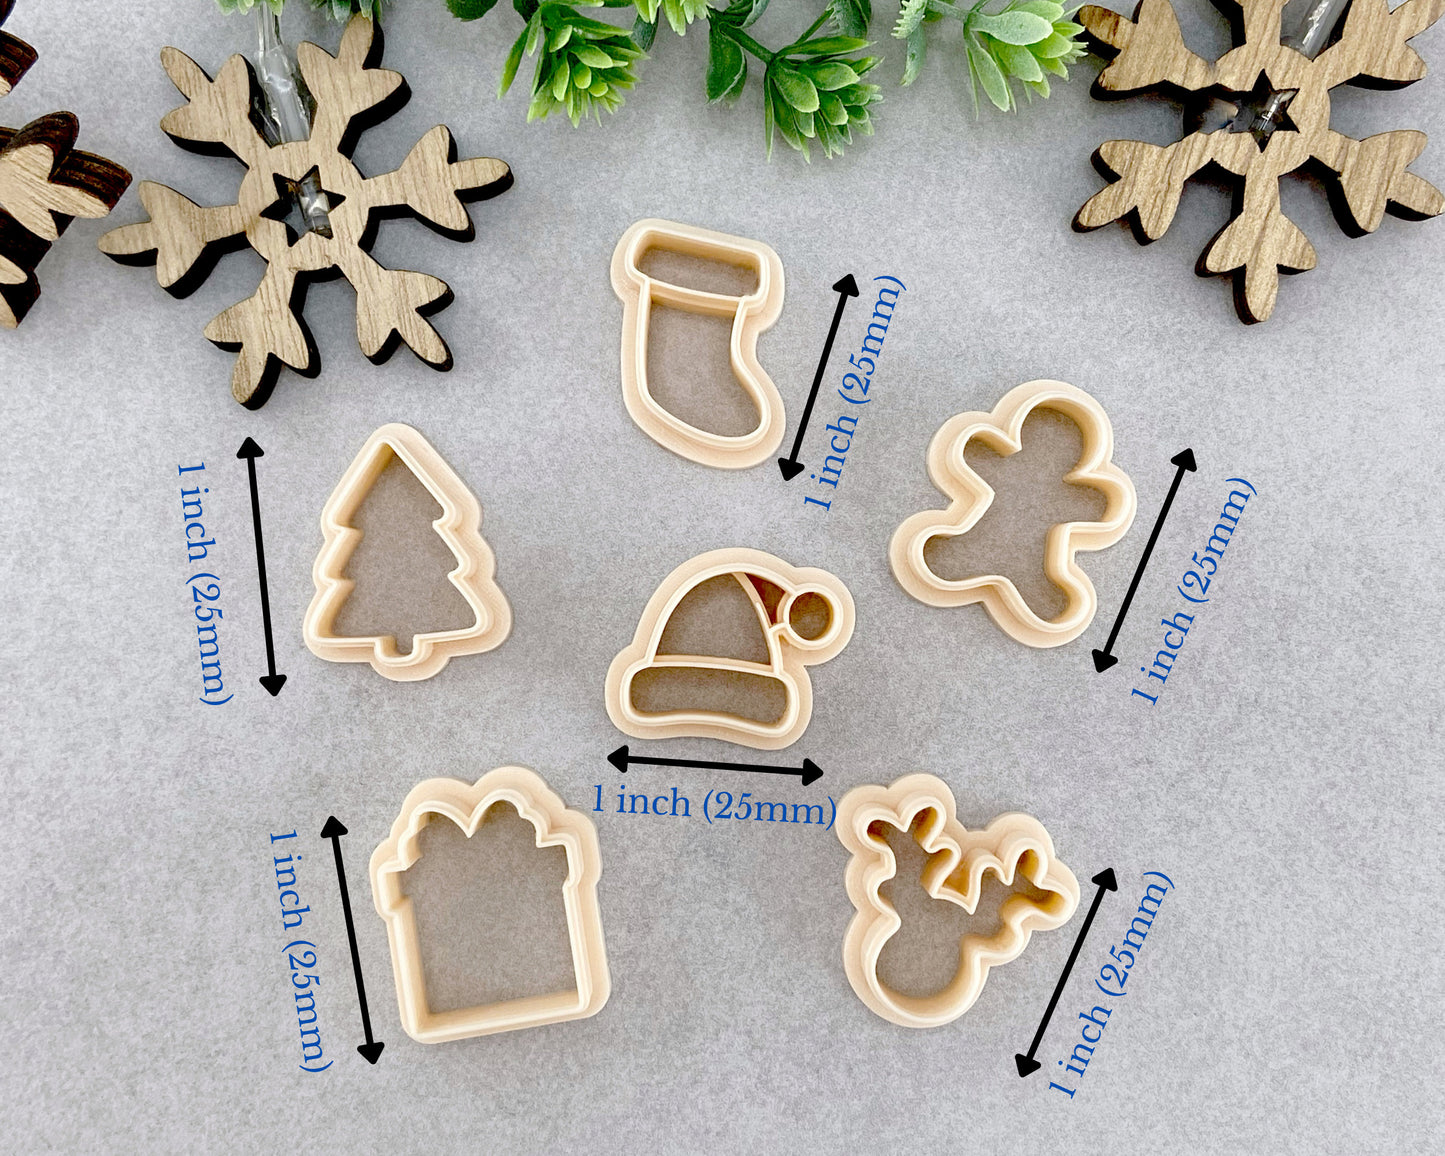 Christmas Polymer Clay Earring Cutter Collection 16 Cutters Set 1 Holiday  Clay Cutter Winter Earring Cutters 